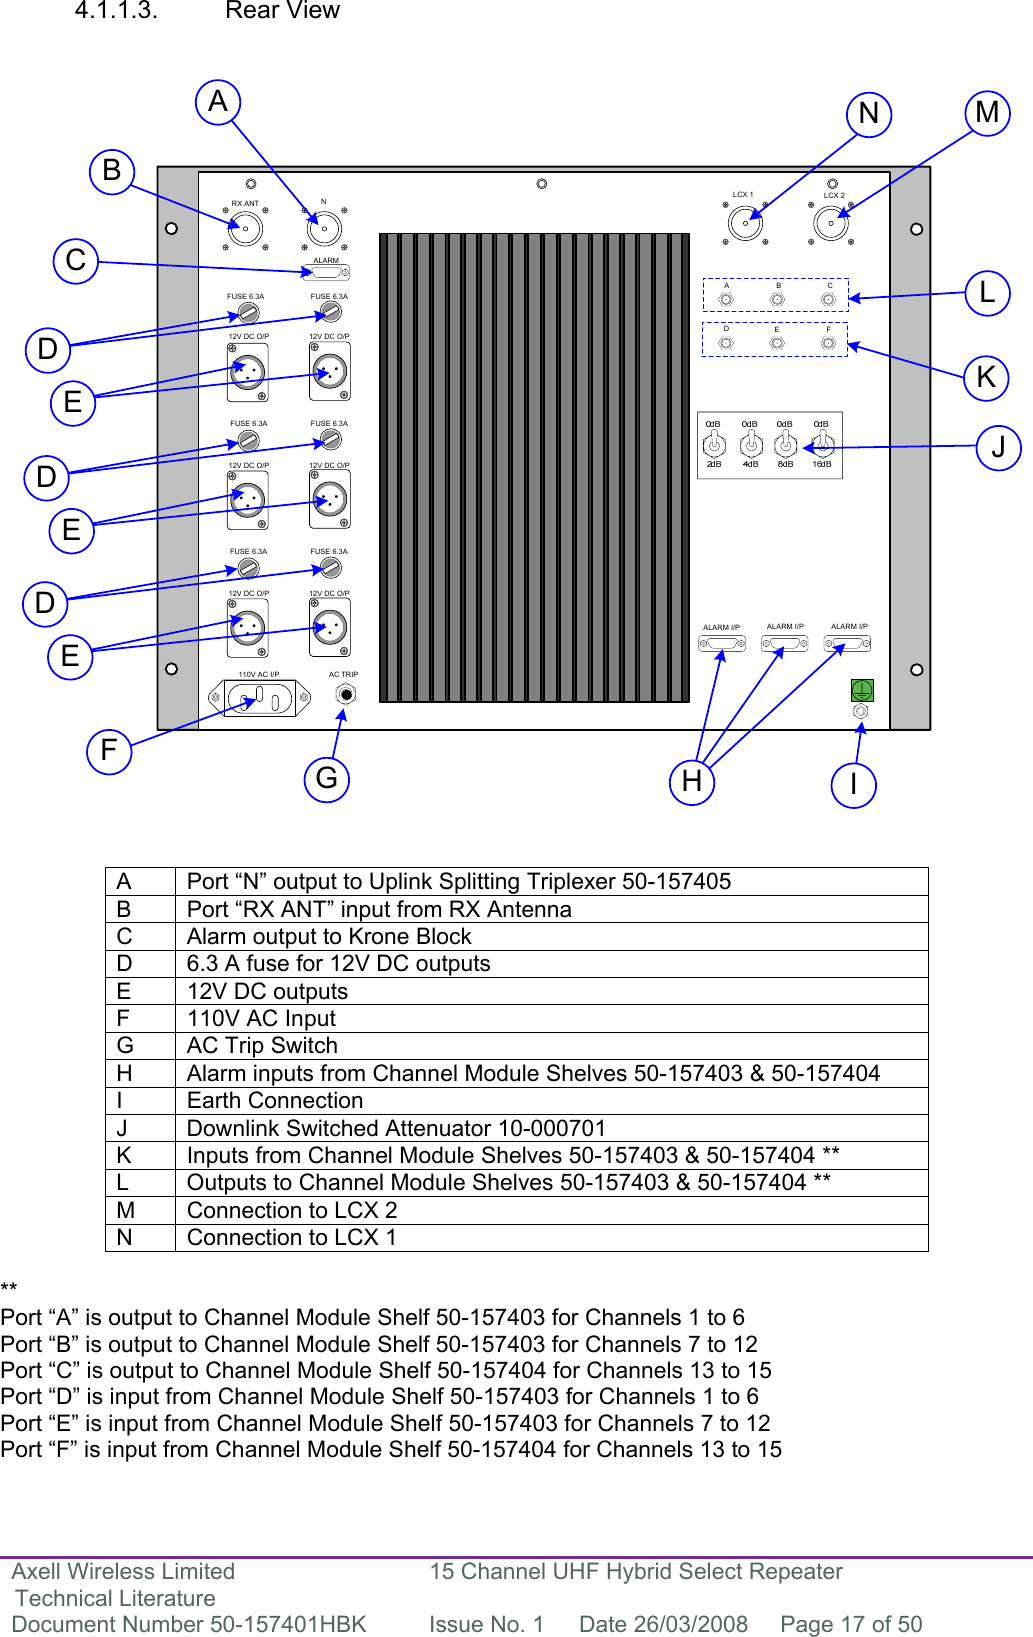 Axell Wireless Limited Technical Literature 15 Channel UHF Hybrid Select Repeater Document Number 50-157401HBK  Issue No. 1  Date 26/03/2008  Page 17 of 50  110V AC I/P AC TRIP12V DC O/P 12V DC O/P12V DC O/P 12V DC O/P12V DC O/P 12V DC O/PFUSE 6.3A FUSE 6.3AFUSE 6.3A FUSE 6.3AFUSE 6.3A FUSE 6.3AALARMNRX ANTALARM I/P ALARM I/P ALARM I/PLCX 1 LCX 2ABCDEFACEDEDEDFGHIJBKLMN 4.1.1.3. Rear View                                 A  Port “N” output to Uplink Splitting Triplexer 50-157405 B  Port “RX ANT” input from RX Antenna C  Alarm output to Krone Block D  6.3 A fuse for 12V DC outputs E  12V DC outputs F  110V AC Input G  AC Trip Switch H  Alarm inputs from Channel Module Shelves 50-157403 &amp; 50-157404 I Earth Connection J  Downlink Switched Attenuator 10-000701 K  Inputs from Channel Module Shelves 50-157403 &amp; 50-157404 ** L  Outputs to Channel Module Shelves 50-157403 &amp; 50-157404 ** M  Connection to LCX 2 N  Connection to LCX 1  **  Port “A” is output to Channel Module Shelf 50-157403 for Channels 1 to 6 Port “B” is output to Channel Module Shelf 50-157403 for Channels 7 to 12 Port “C” is output to Channel Module Shelf 50-157404 for Channels 13 to 15 Port “D” is input from Channel Module Shelf 50-157403 for Channels 1 to 6 Port “E” is input from Channel Module Shelf 50-157403 for Channels 7 to 12 Port “F” is input from Channel Module Shelf 50-157404 for Channels 13 to 15   